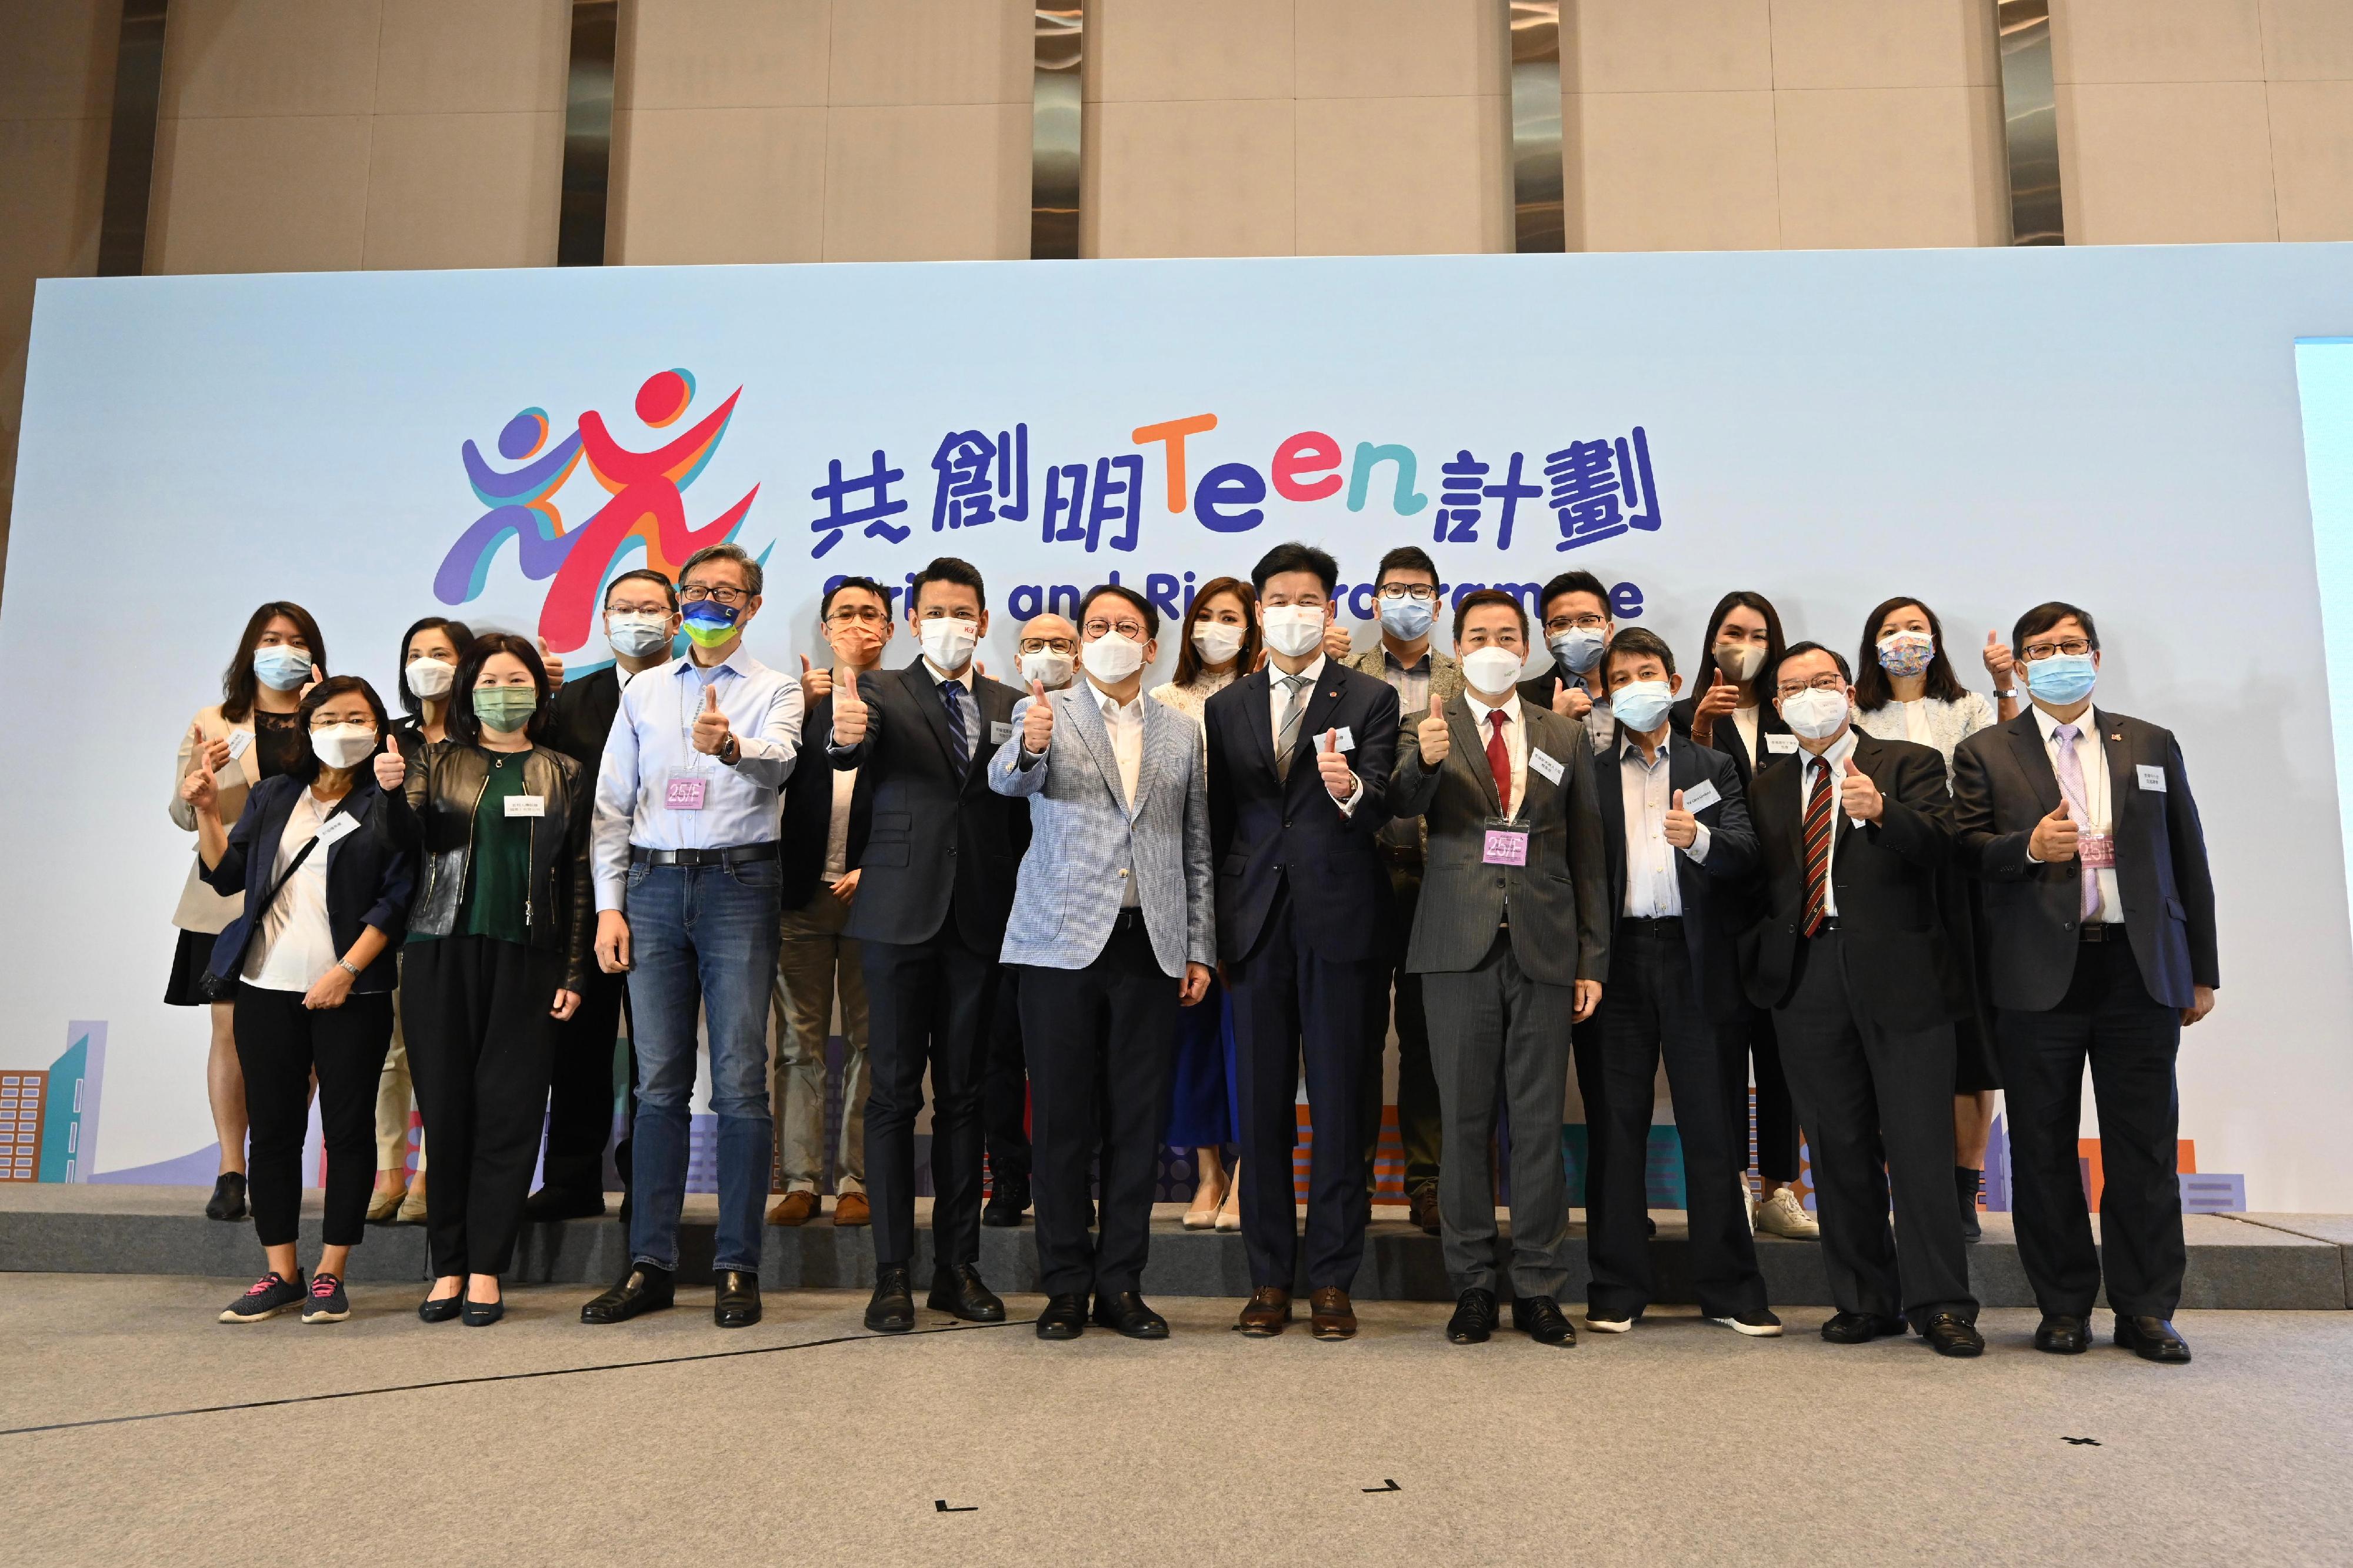 Chief Secretary for Administration, Mr Chan Kwok-ki, attended the Kick-off Ceremony and Orientation Day of the Strive and Rise Programme today (October 29). Photo shows Mr Chan (first row, sixth right) in a photo with representatives of the enterprises and organisations that support the Programme.